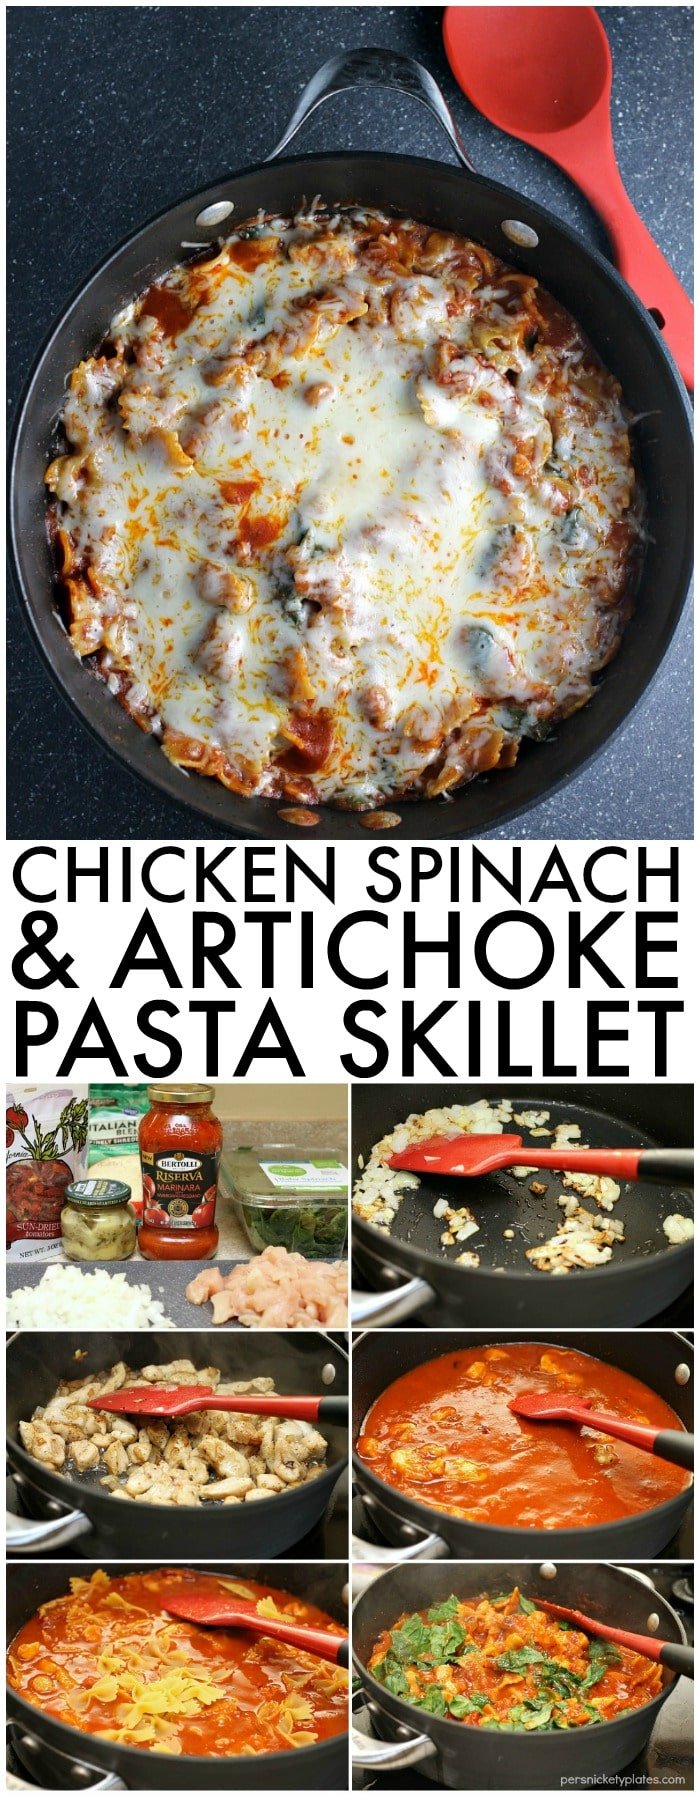 Chicken Spinach & Artichoke Pasta Skillet - a full meal loaded with spring flavors made all in the same skillet! | Persnickety Plates AD